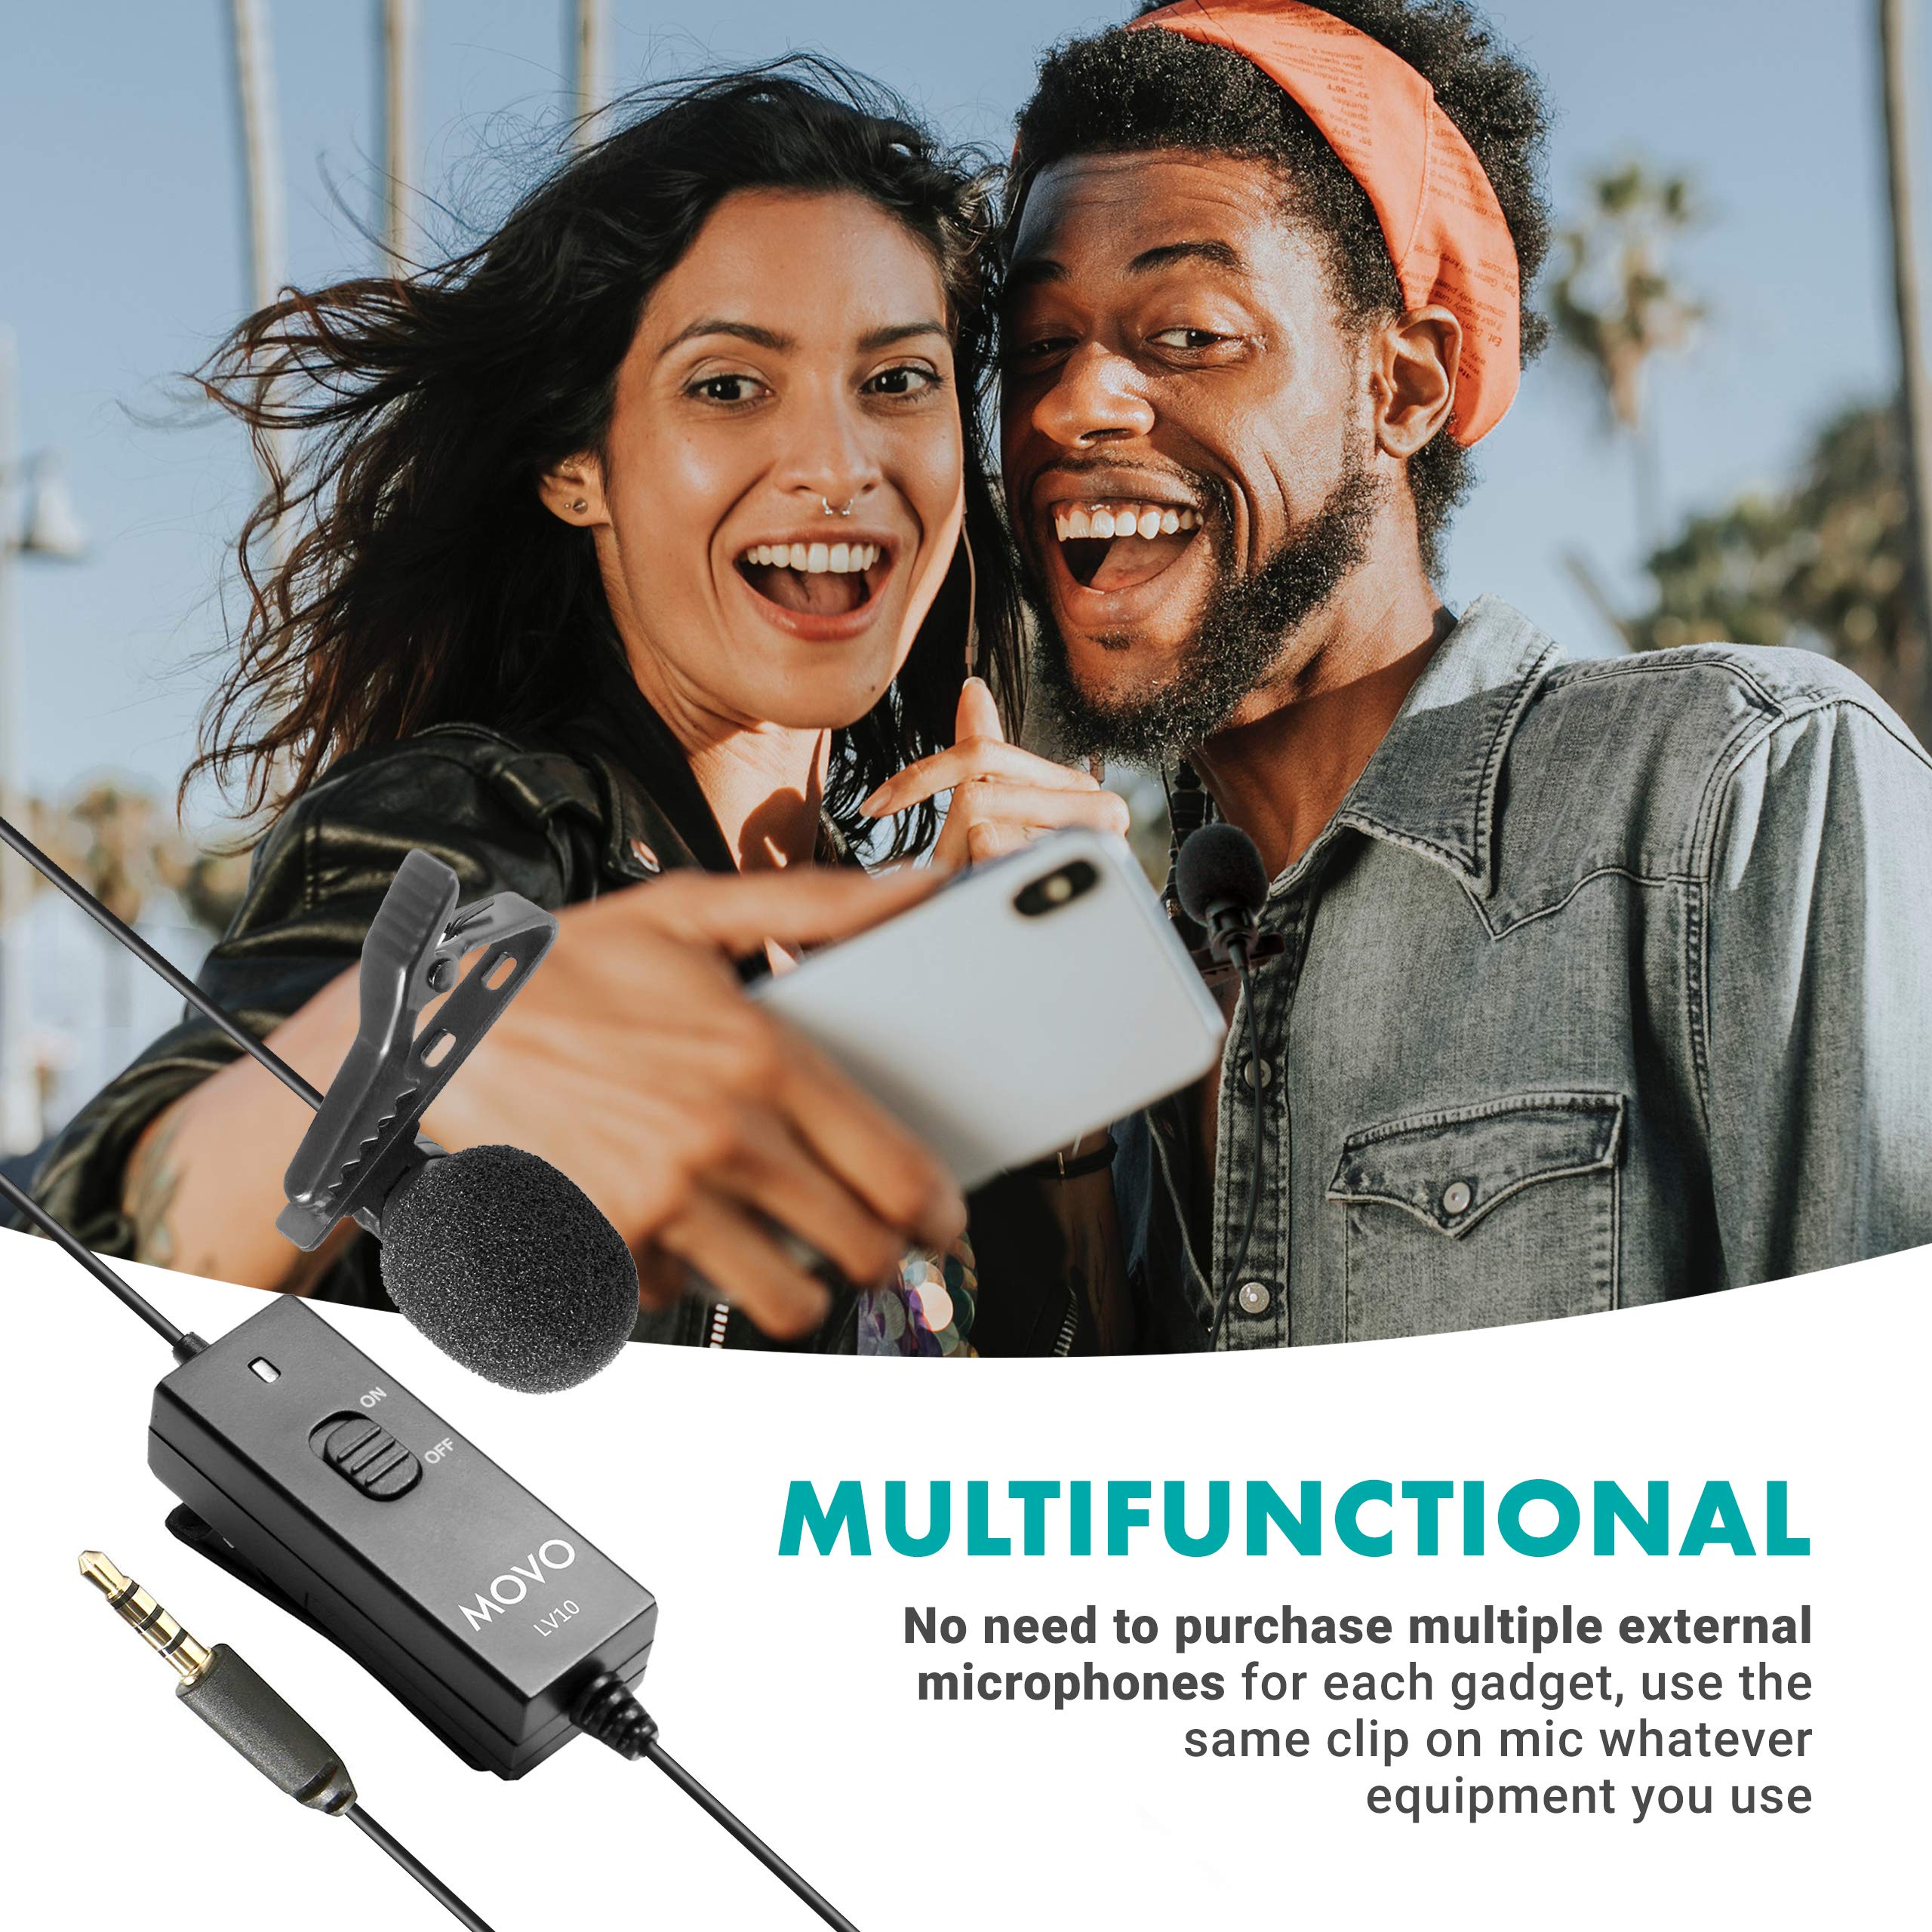 Movo LV10 Battery-Powered Lavalier Clip-on Omnidirectional Condenser TRRS Microphone for Apple iPhone, iPad, iPod and Samsung Galaxy Smartphones, Cameras, Camcorders, Recorders  - Very Good